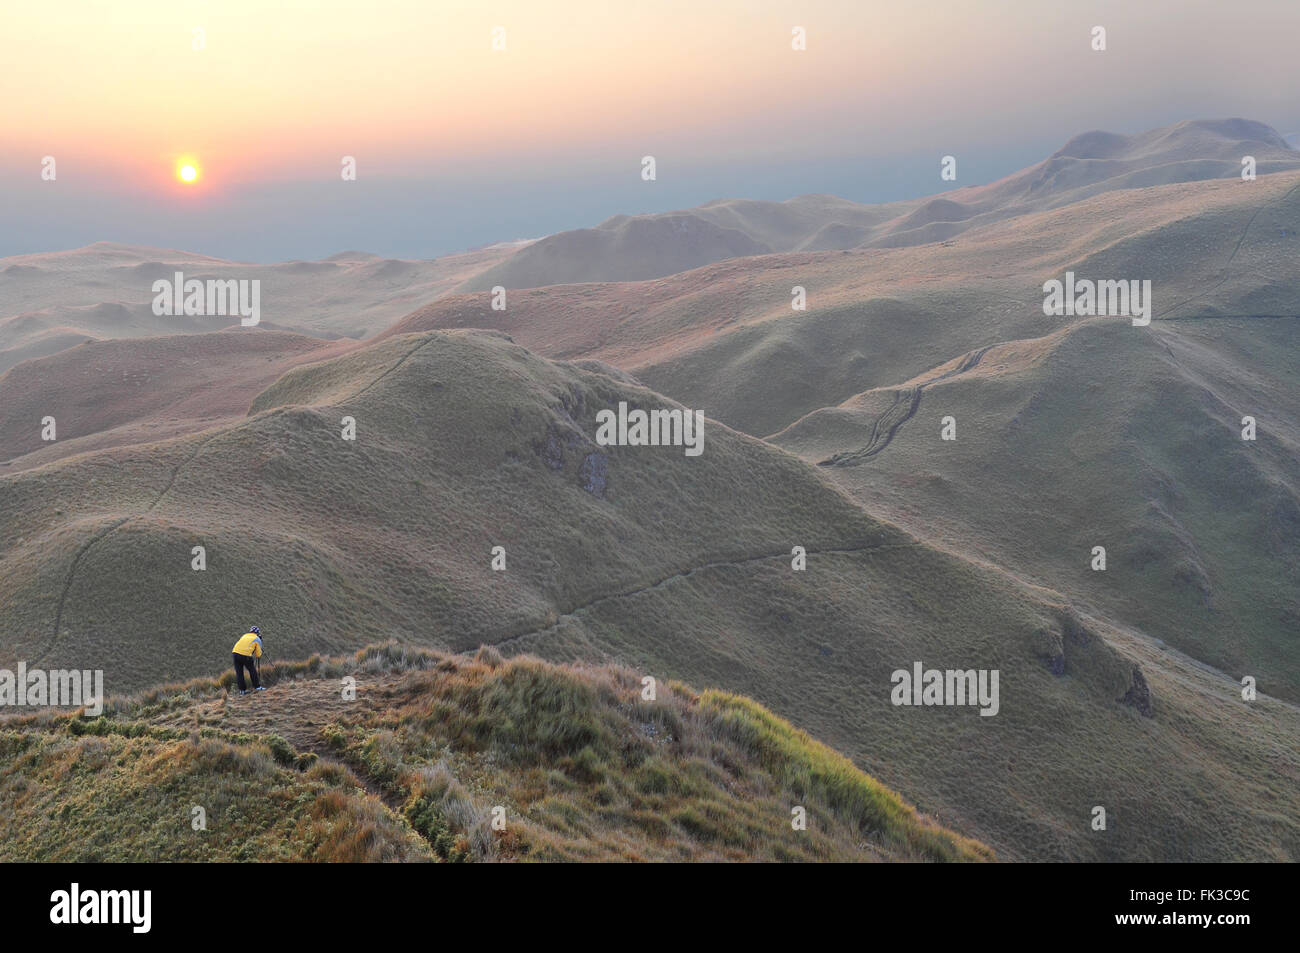 A lone photographer on top of a hill on peaceful mountain ranges. Stock Photo